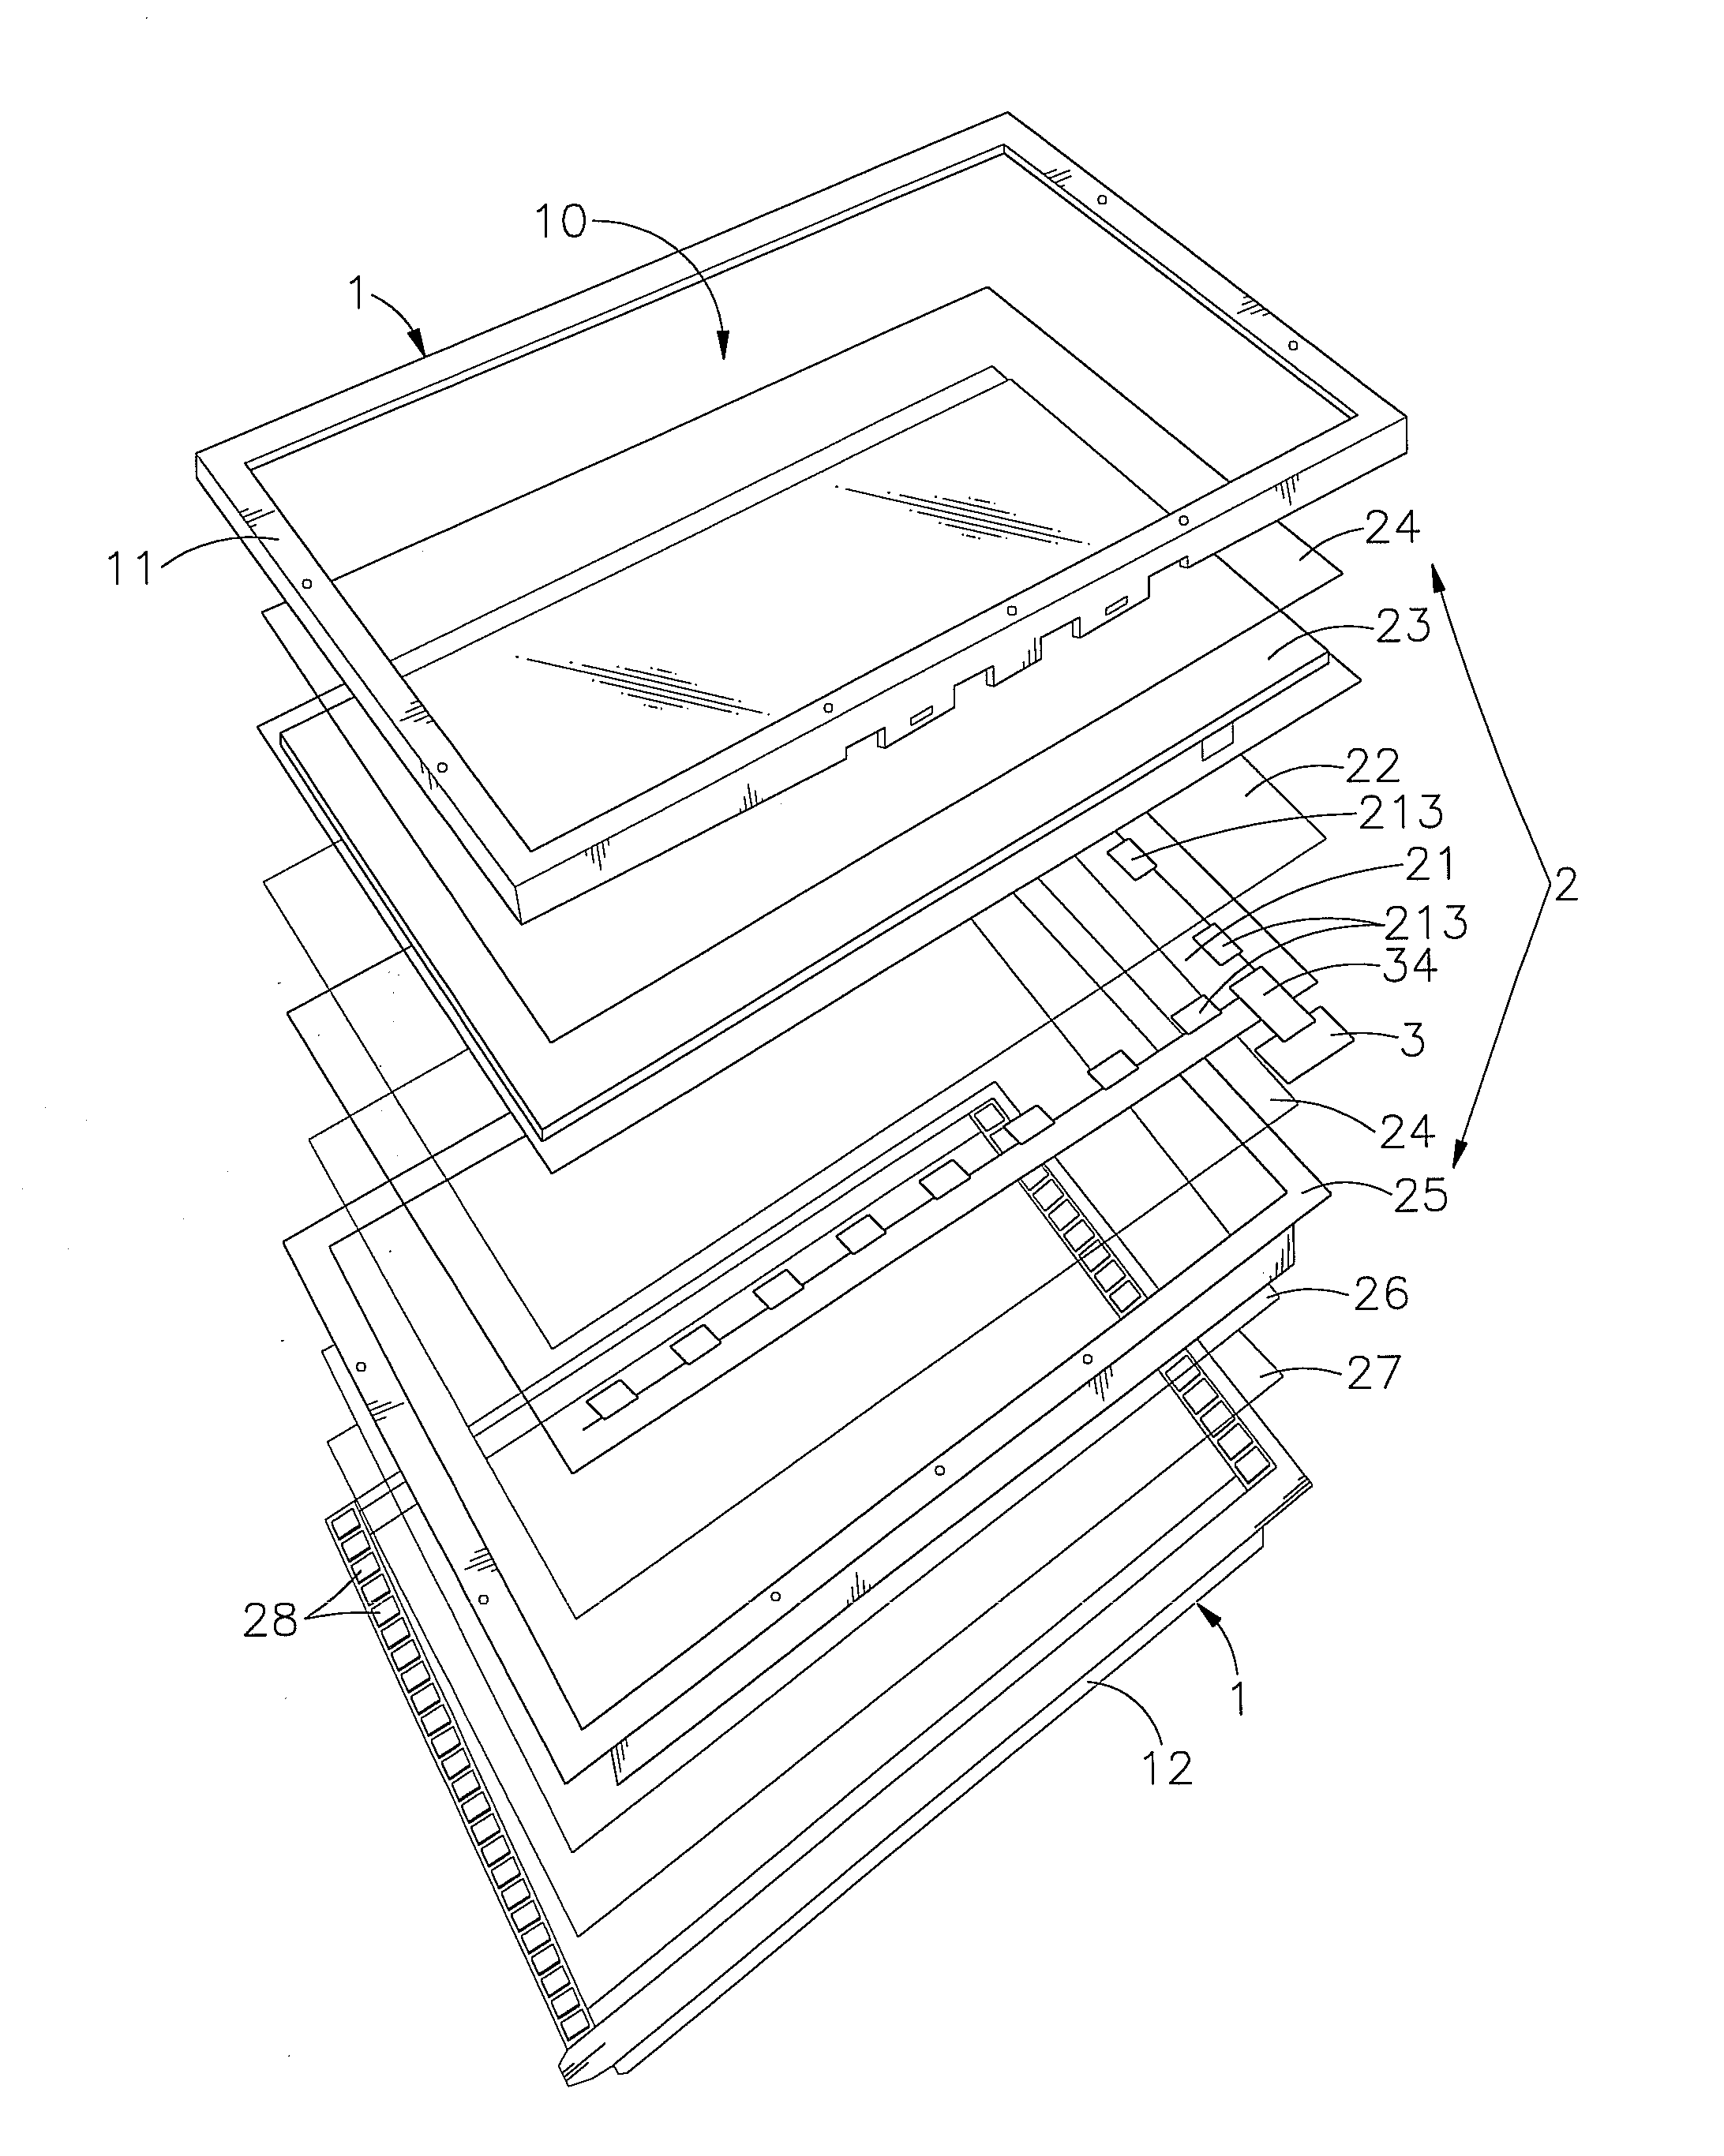 Display panel with network communication function